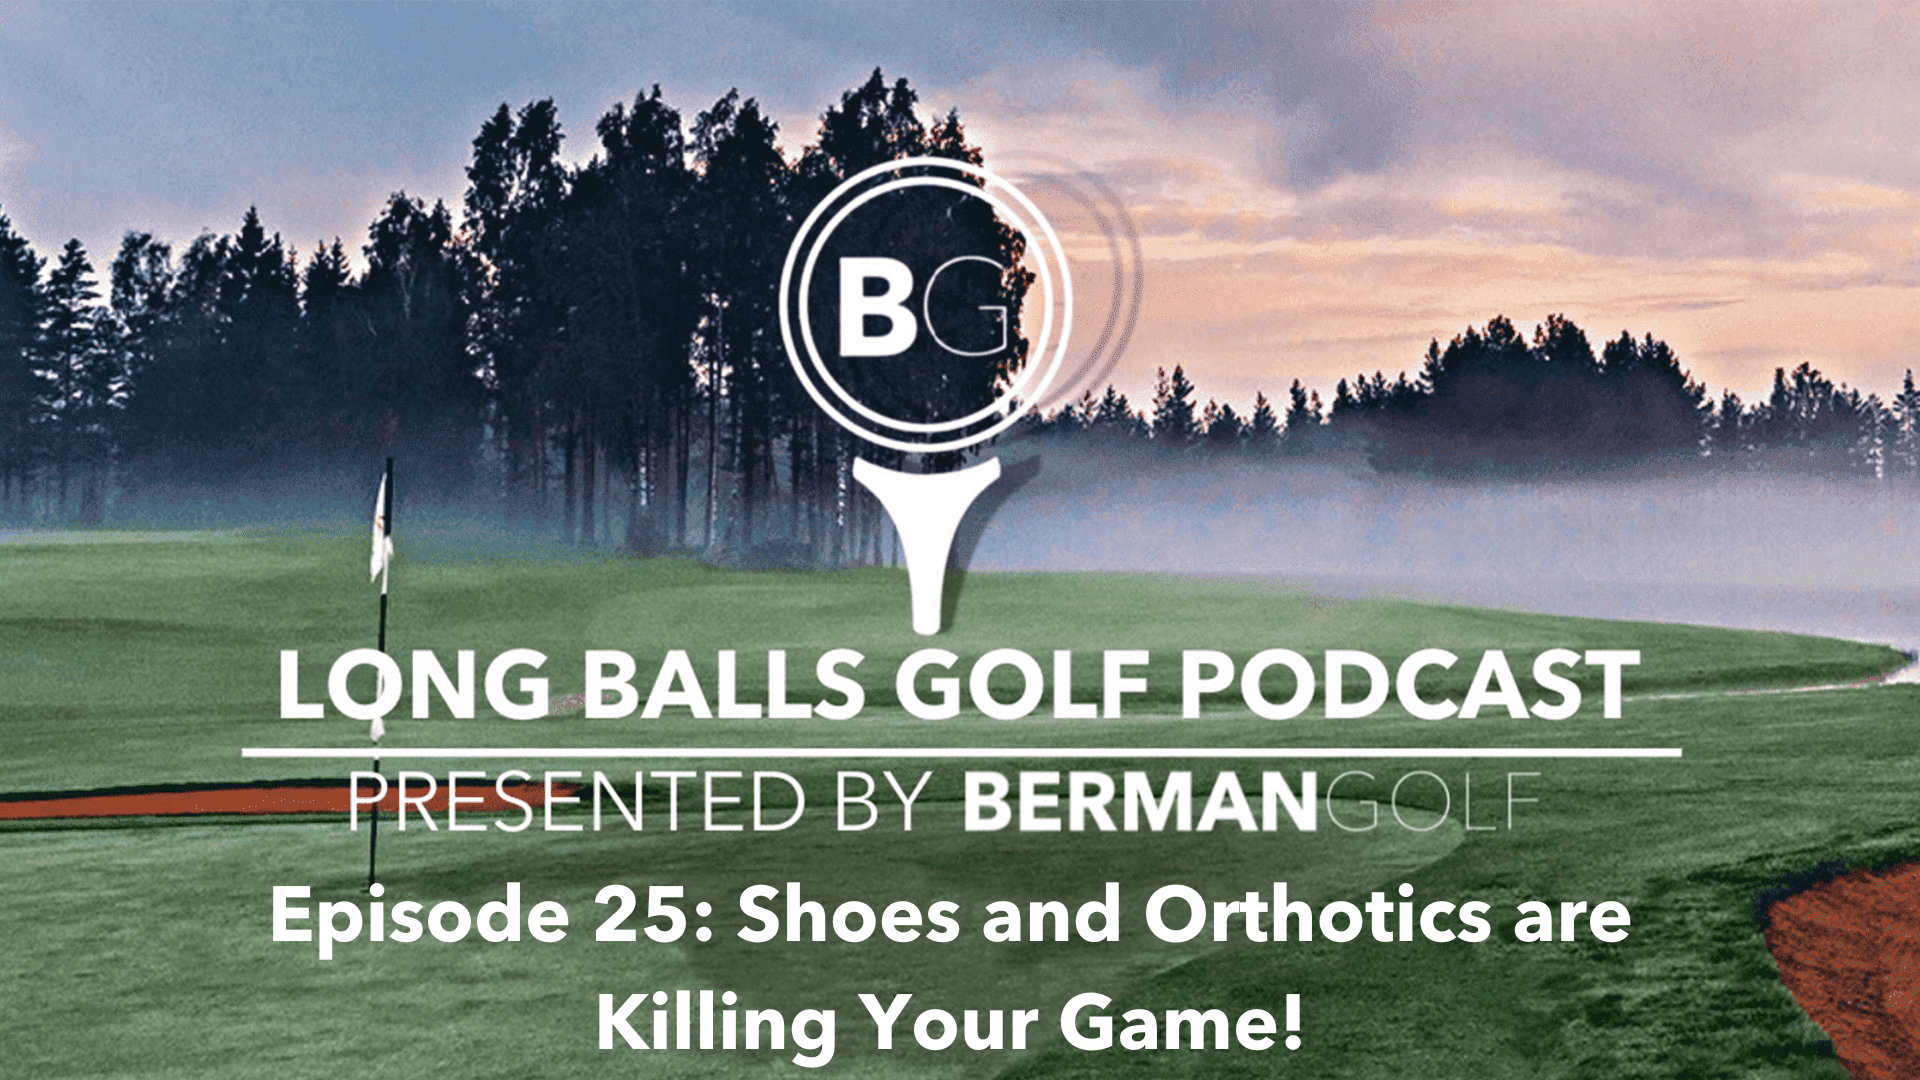 Episode 25: Shoes and Orthotics are Killing Your Game!